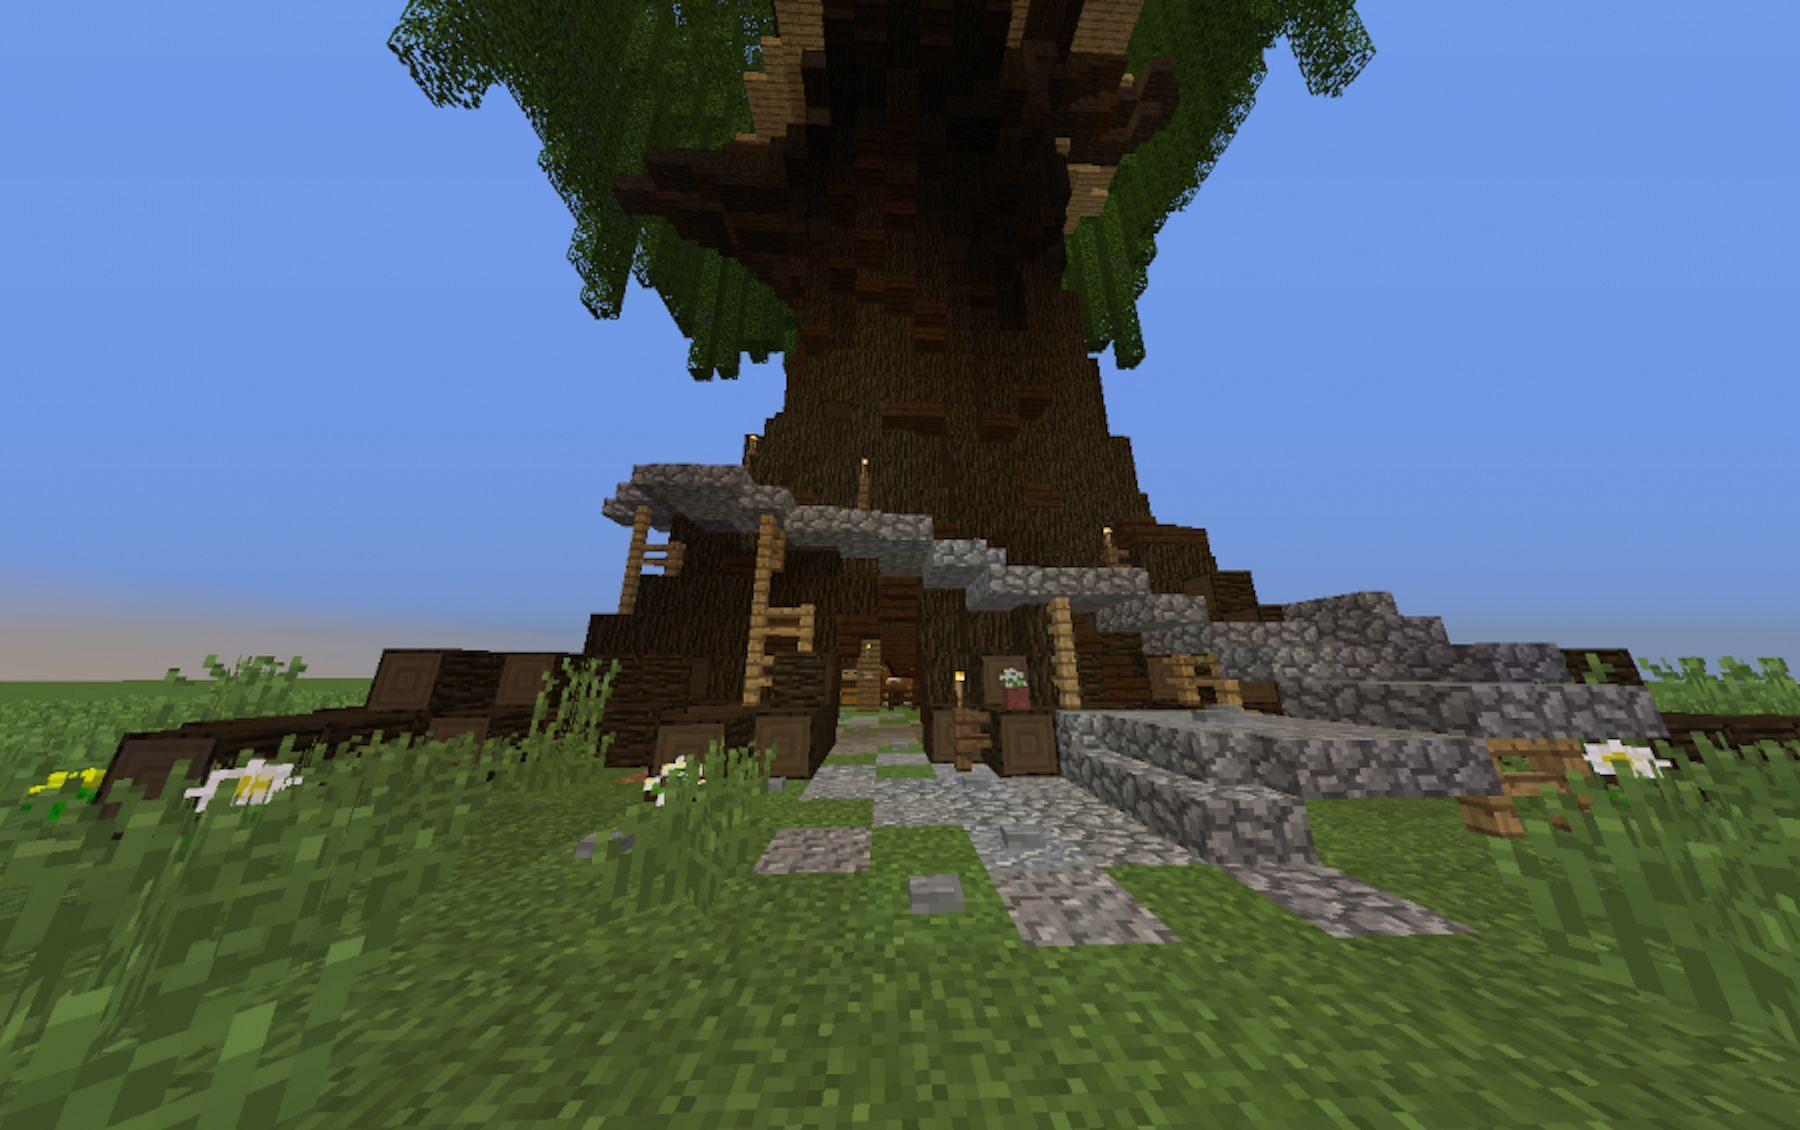 Inside the Trunk is actually inside a hollowed-out tree trunk (Image via Minecraft)